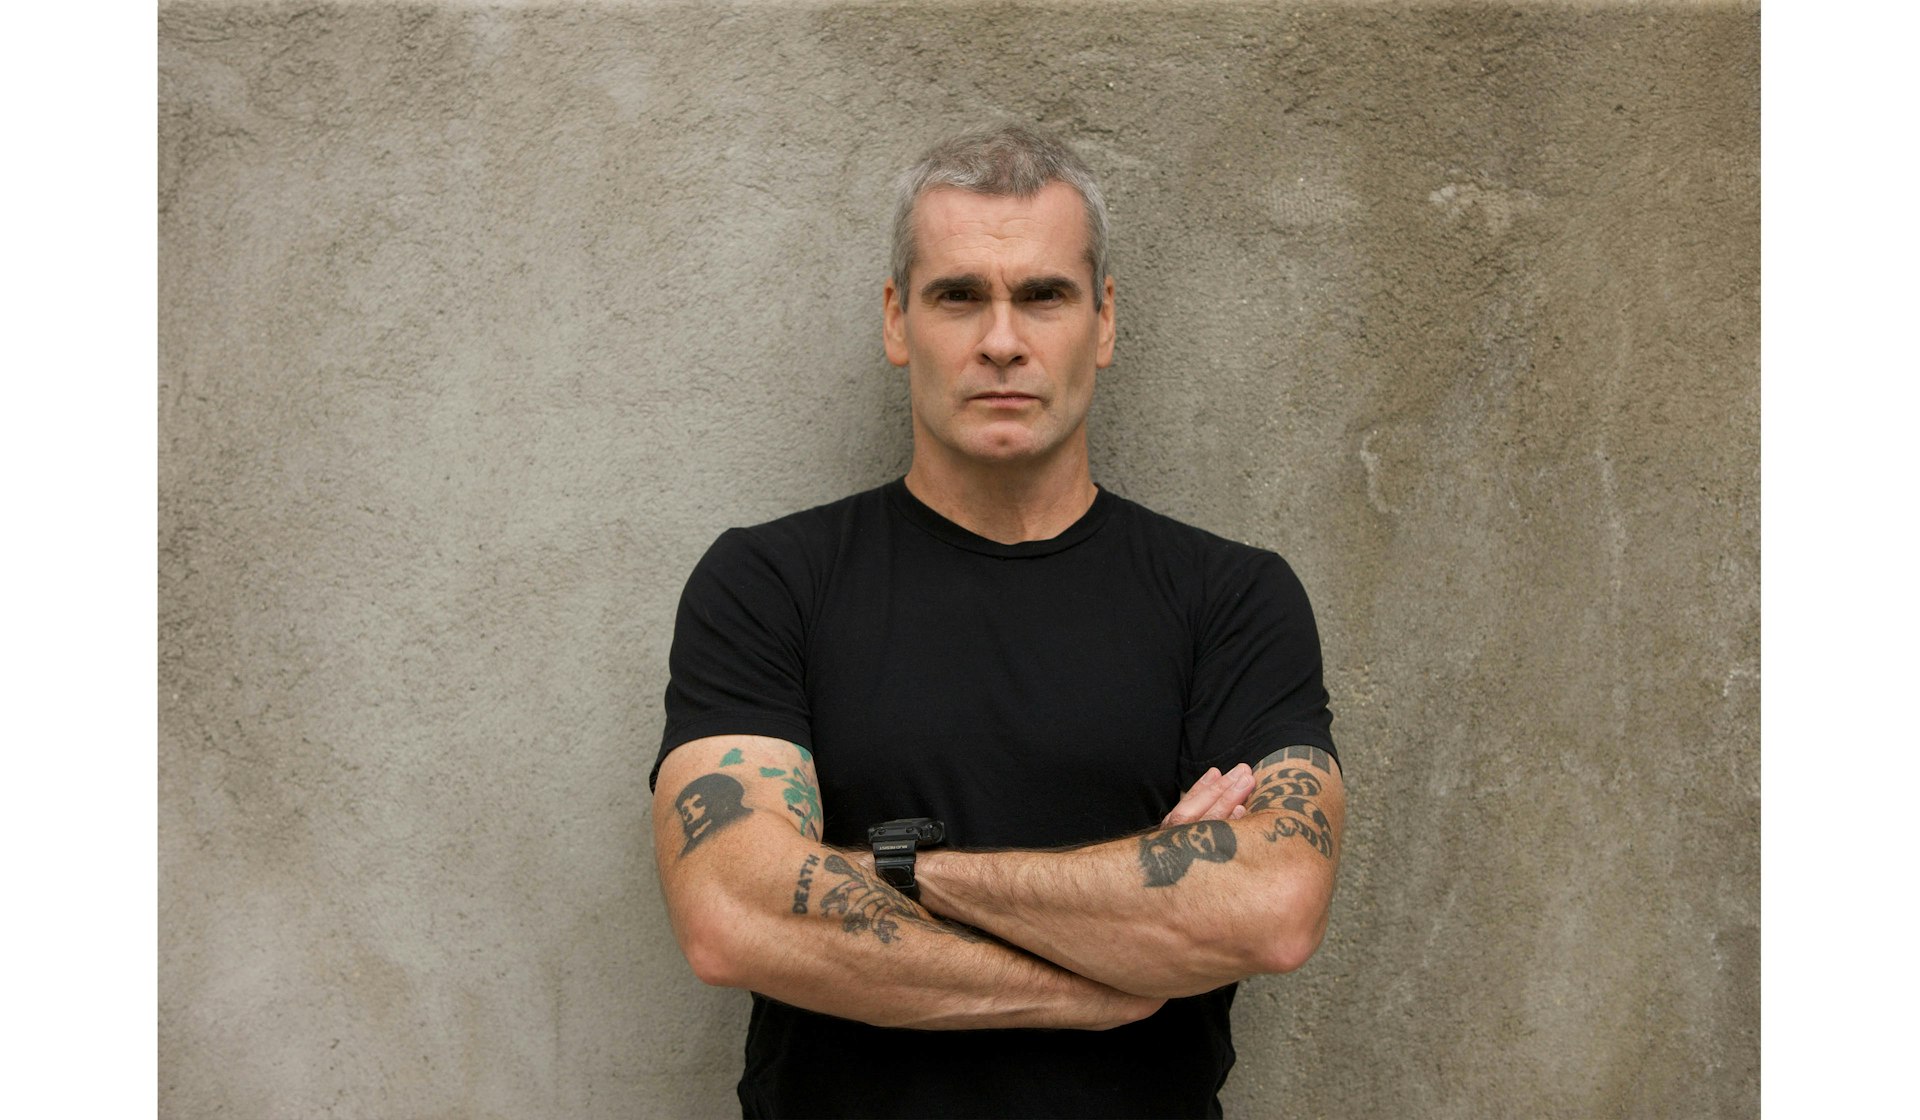 Five things we learned from Henry Rollins